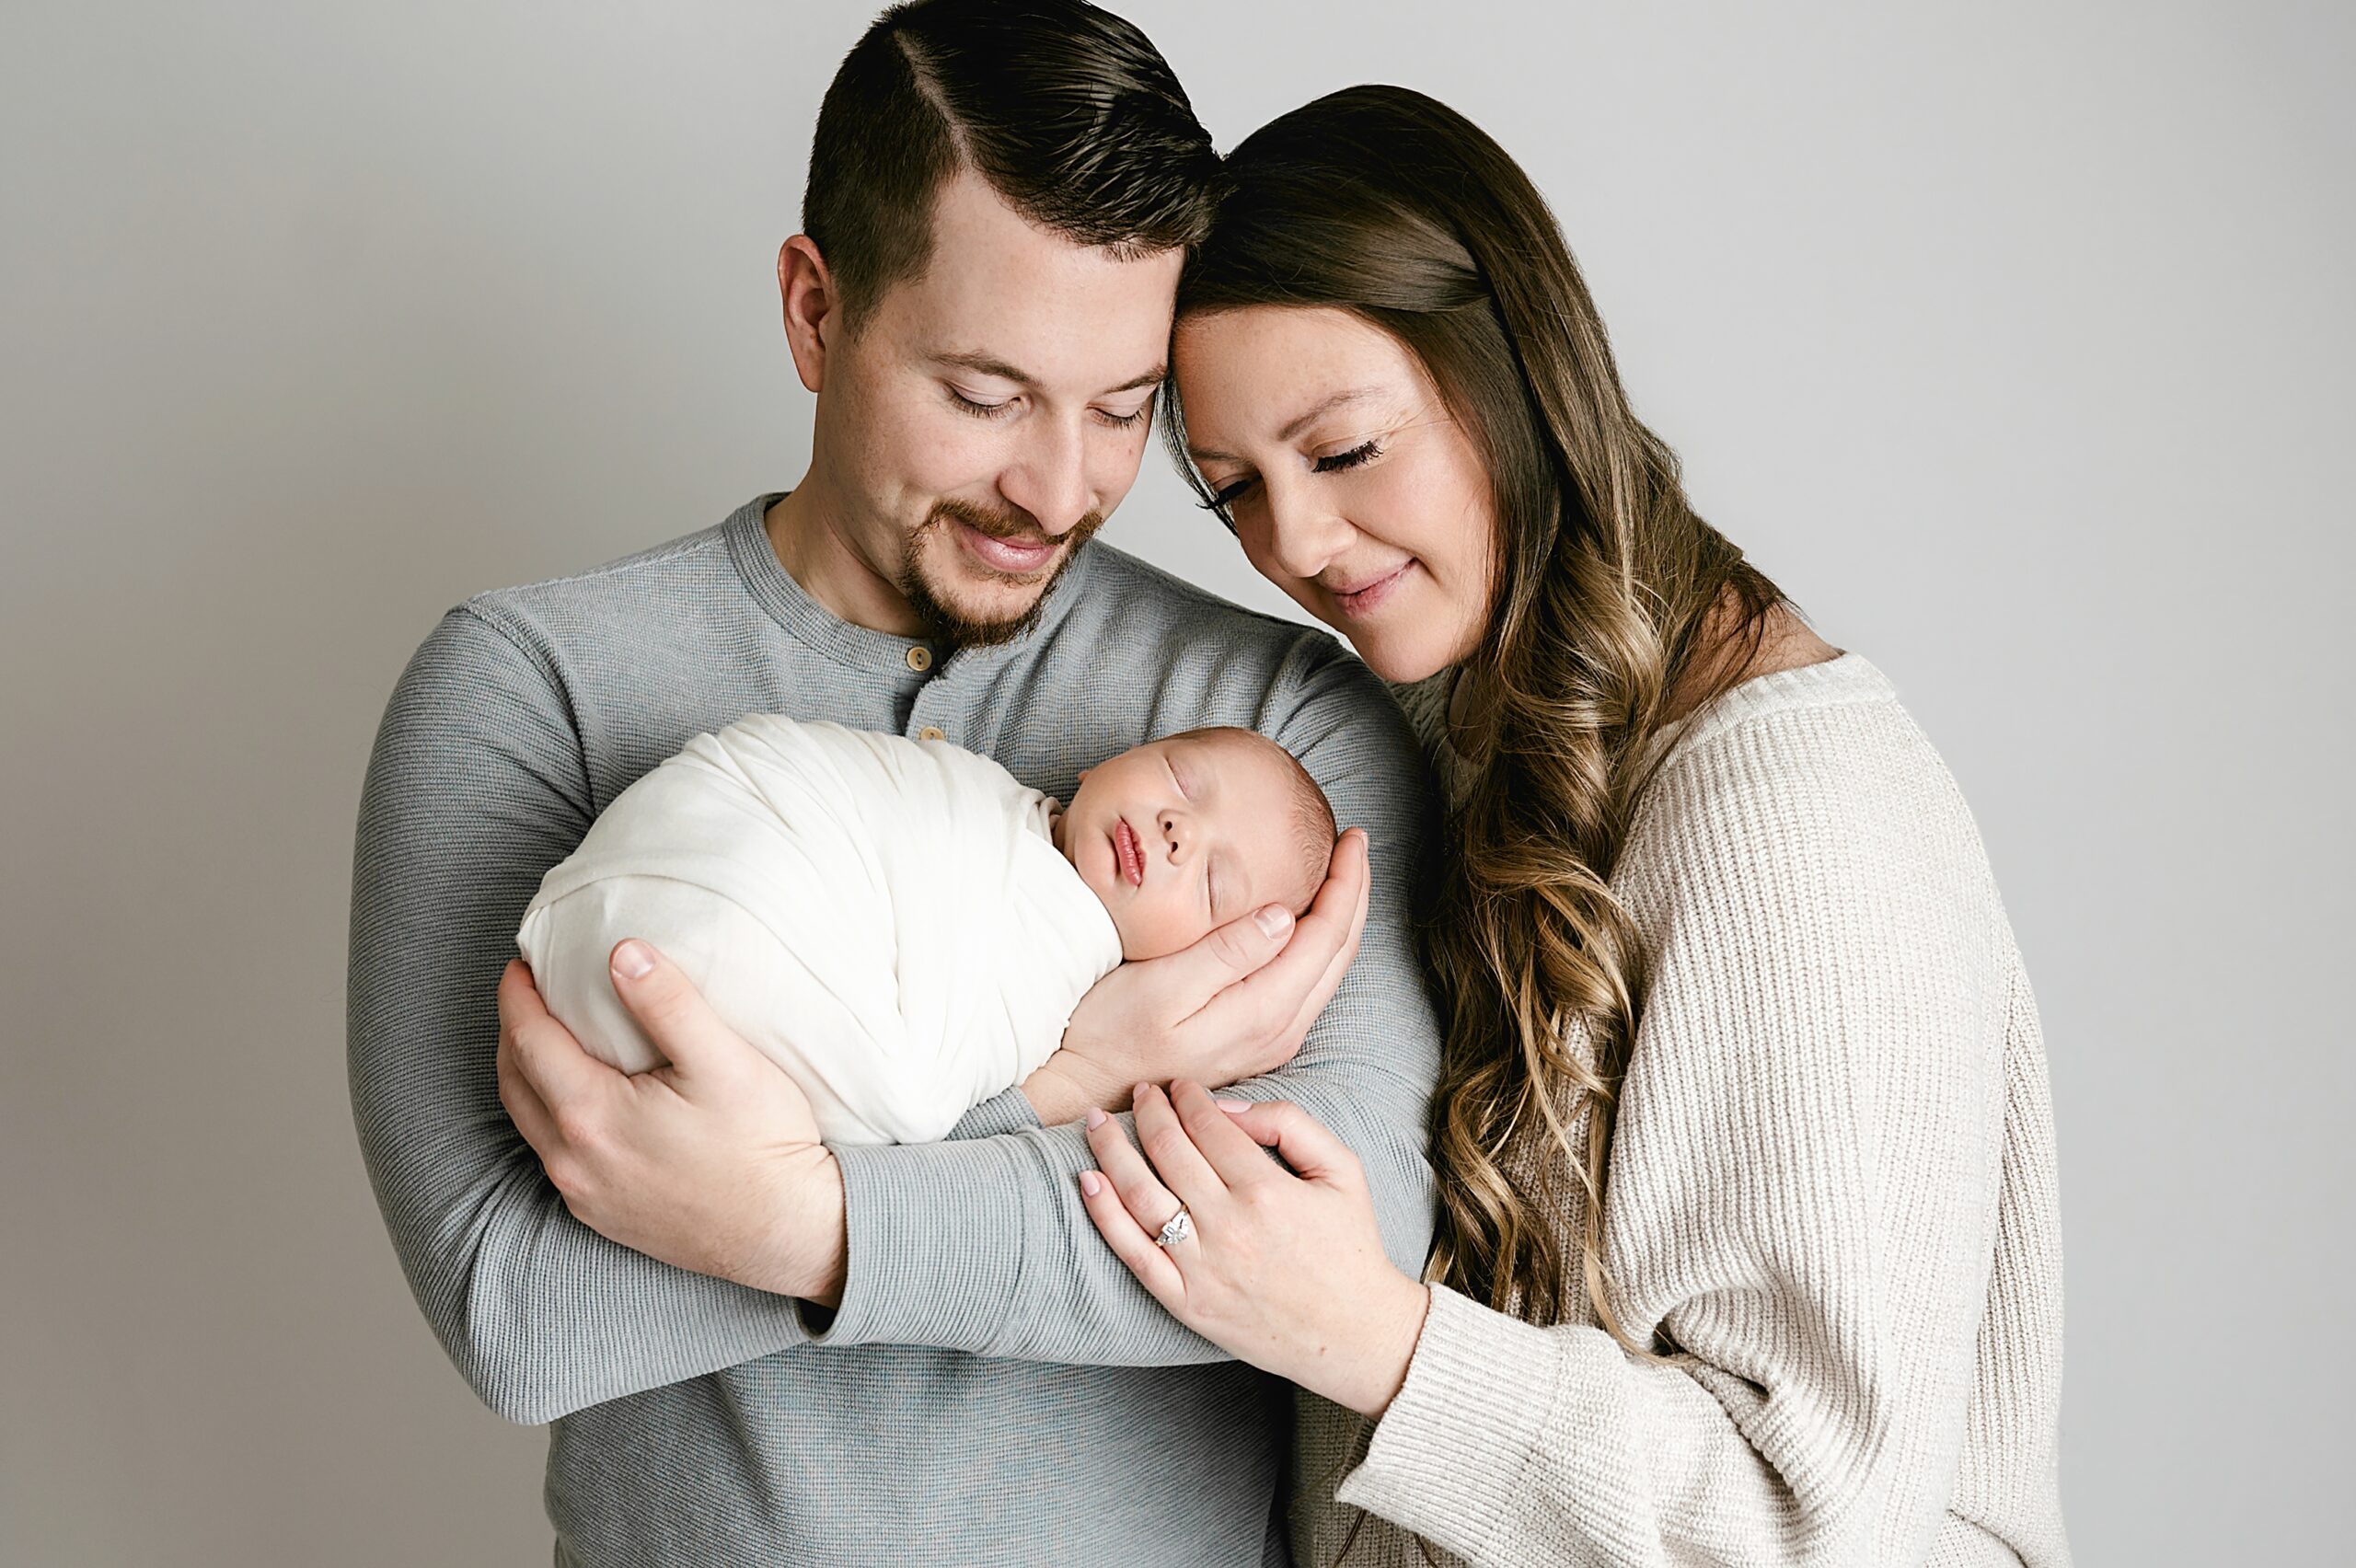 Dad snuggles baby boy to his chest while mom hugs dad's should and they both look down at their newborn during pittsburgh baby photography session.